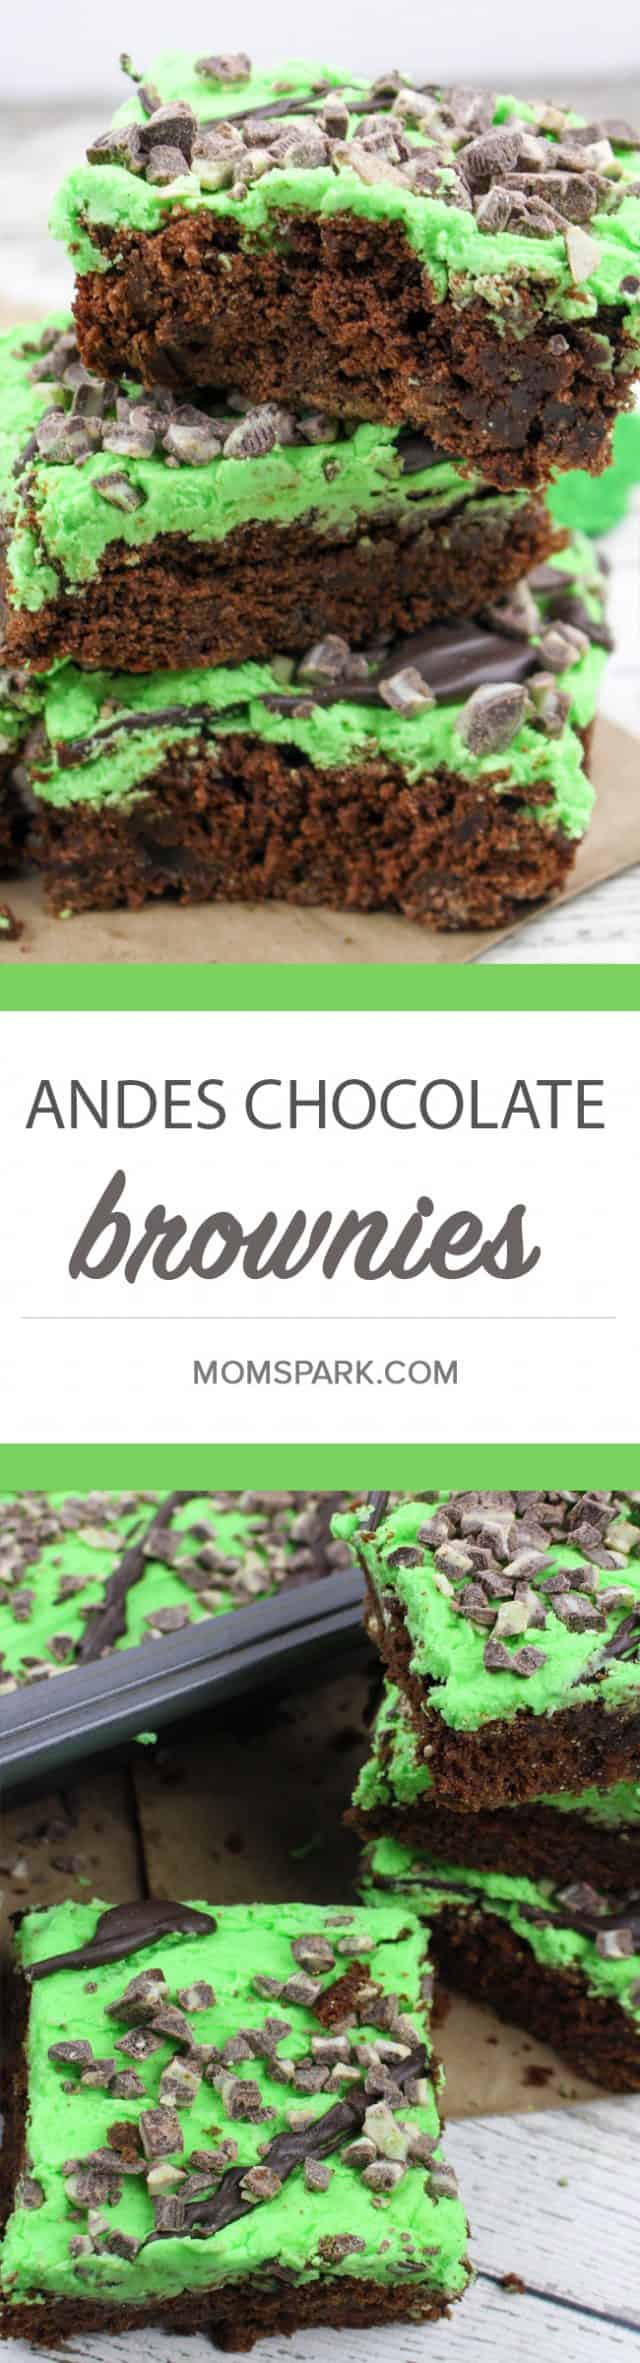 Andes Chocolate Peppermint Brownies Recipe